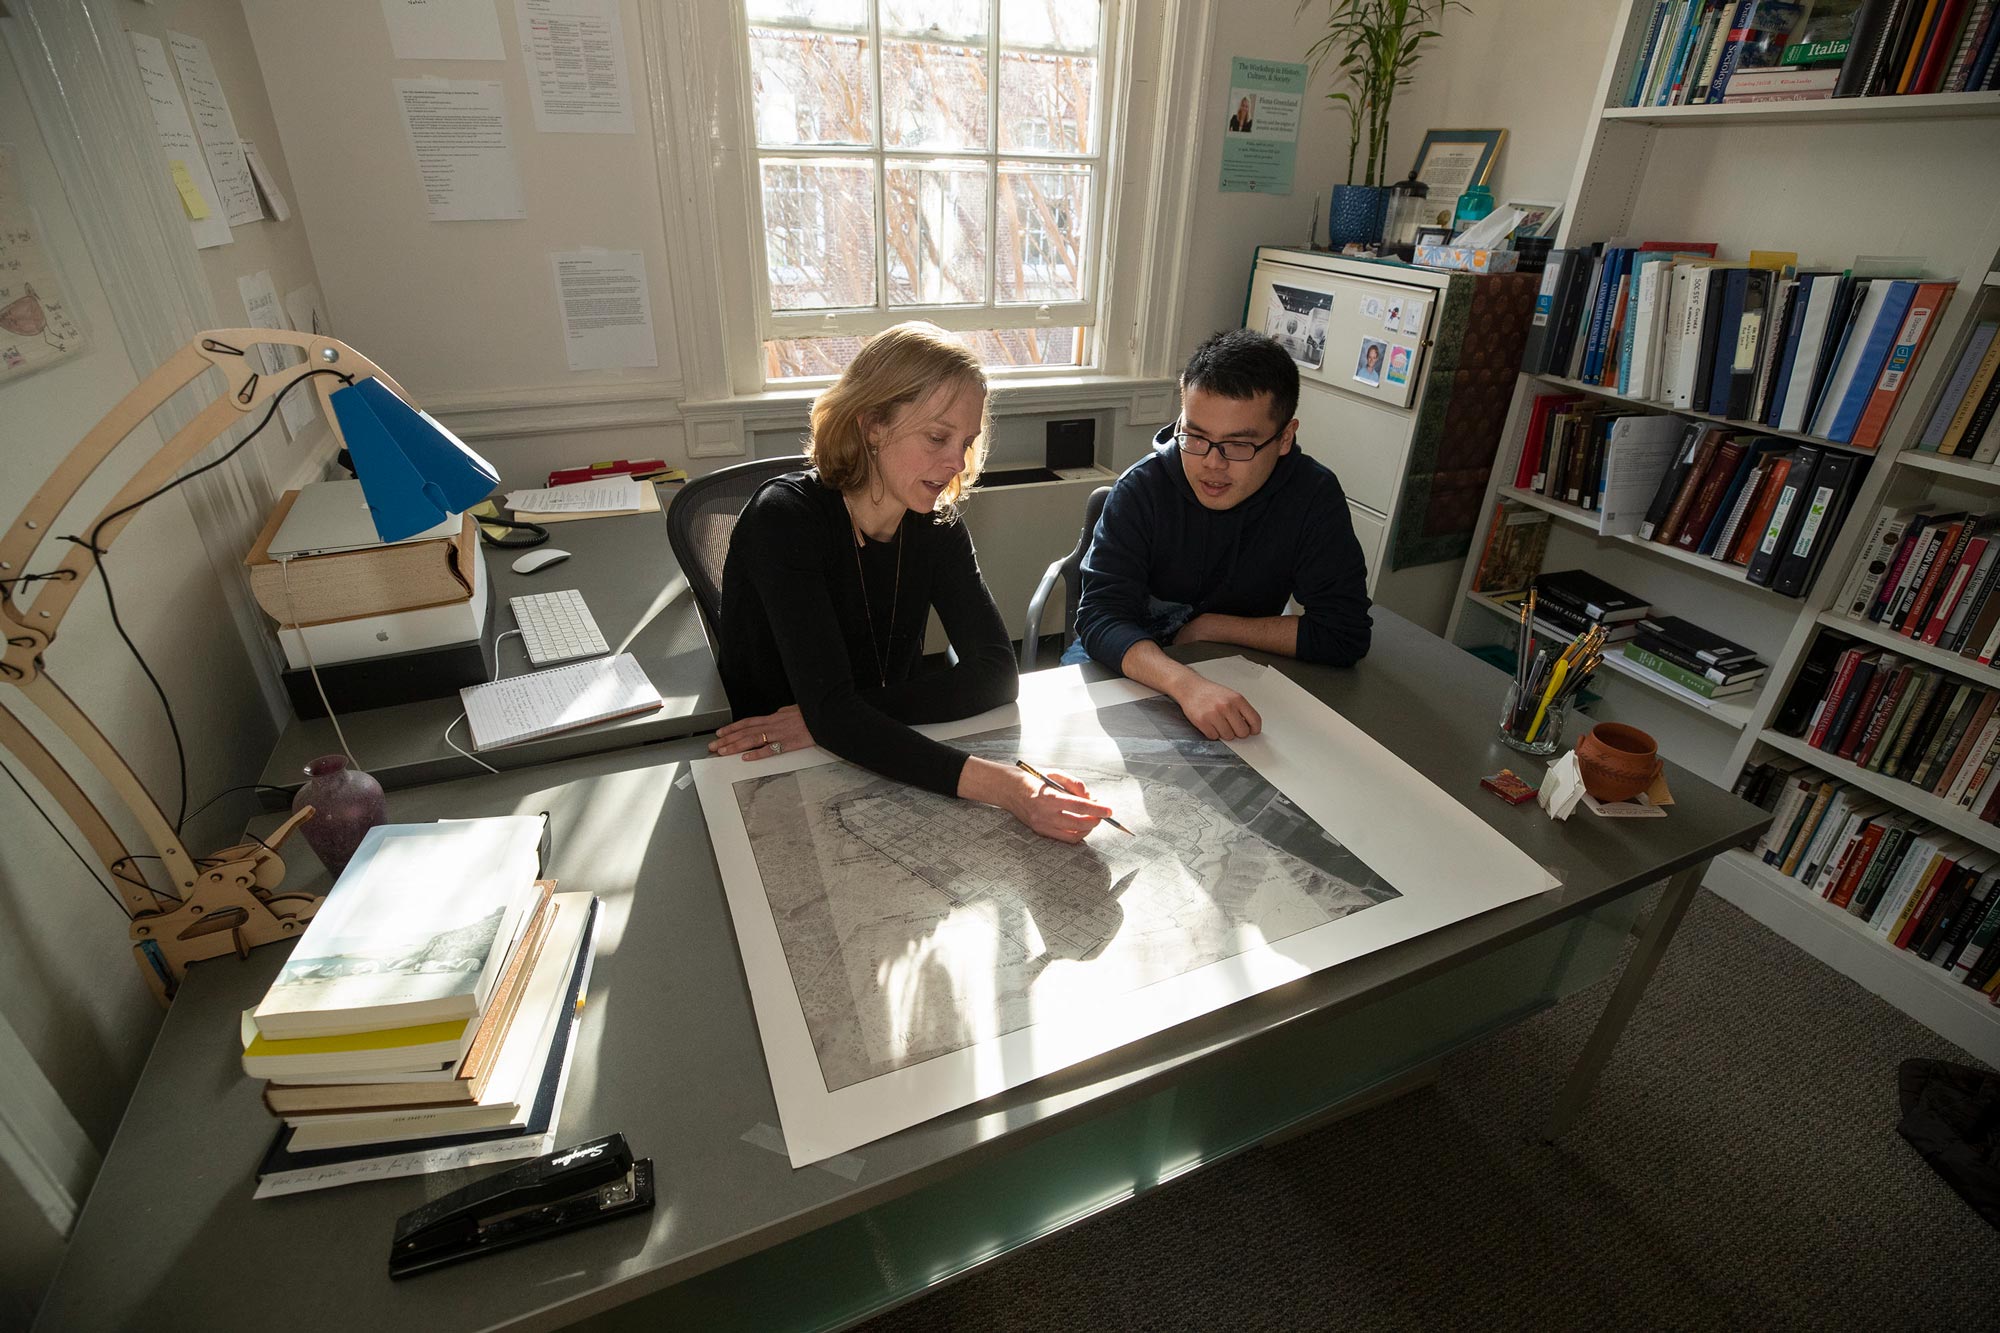 Fiona Greenland, left, works with  Di Shao, right, at a table looking at a map